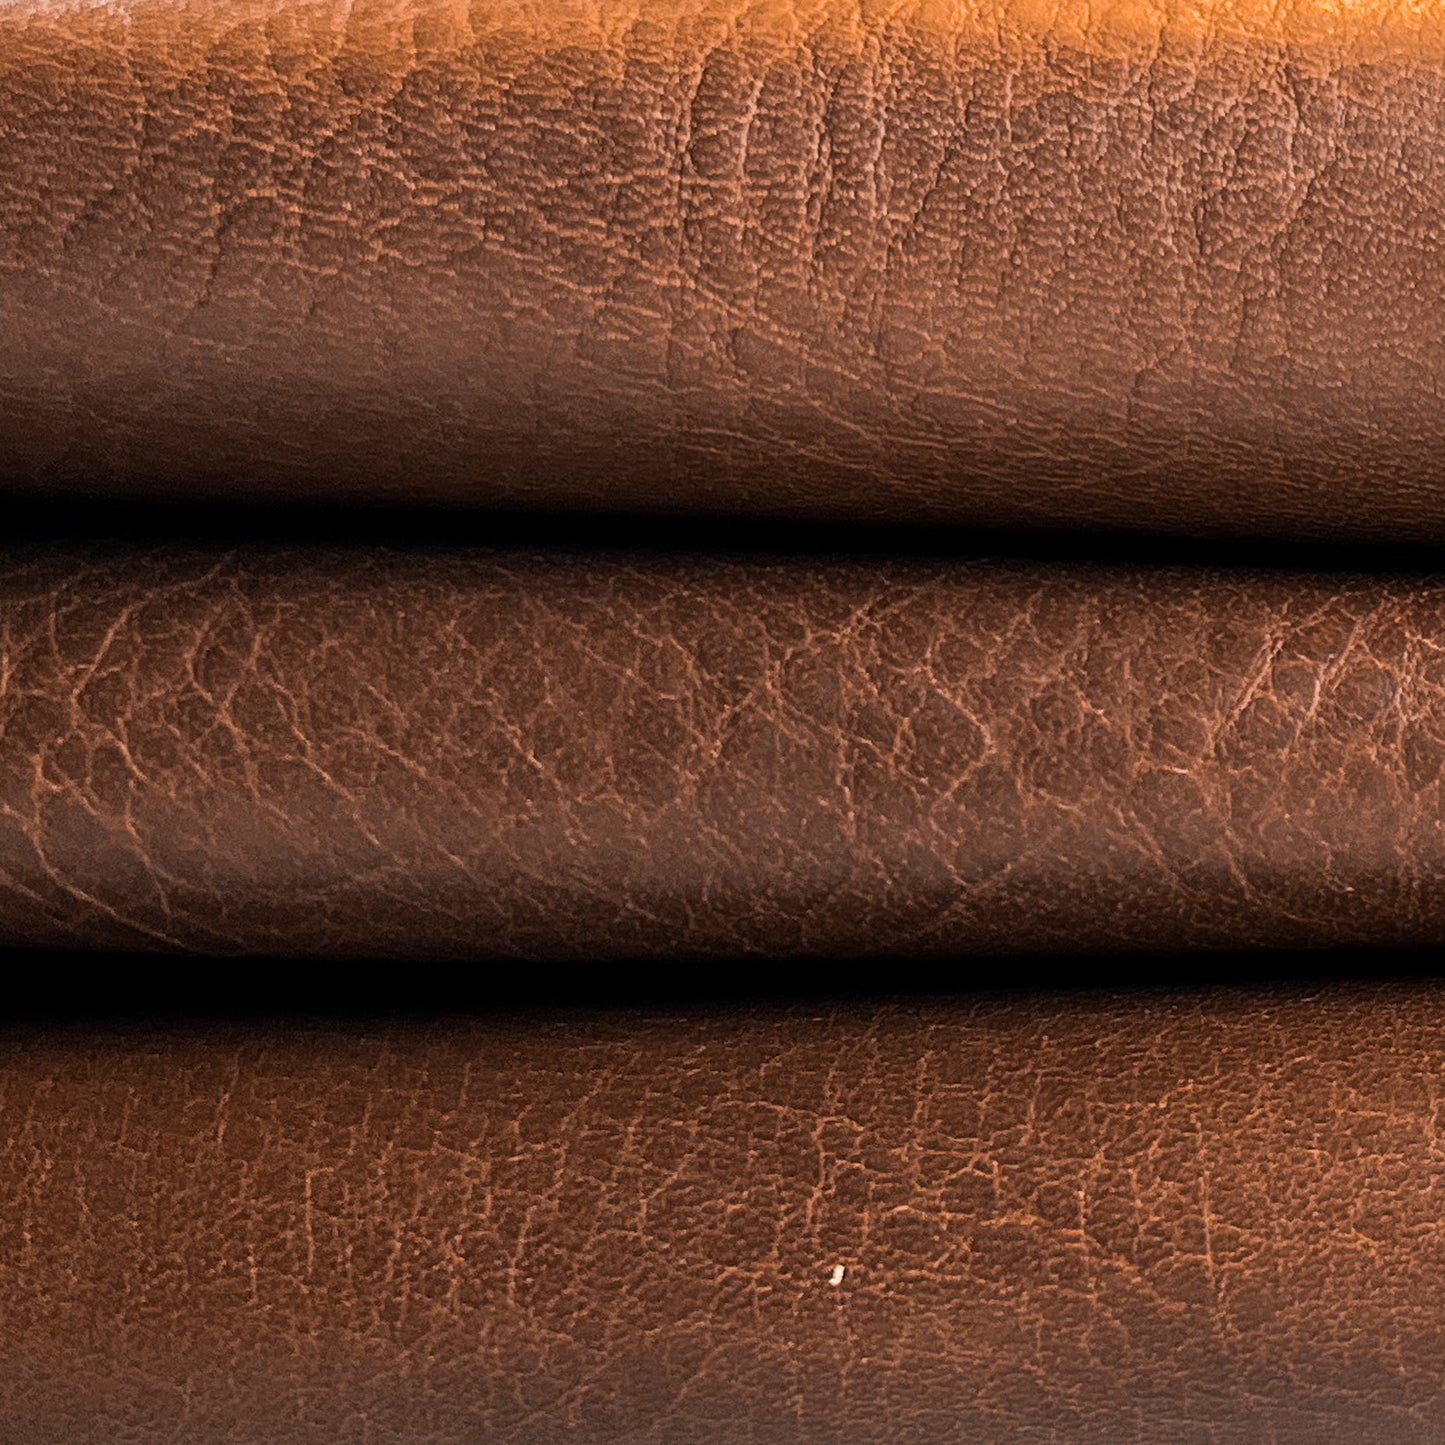 Brown Thick Calf Vegetable With Texture 1.7-1.9mm/4.25-4.75oz / Classic BROWN VEG TAN 1453